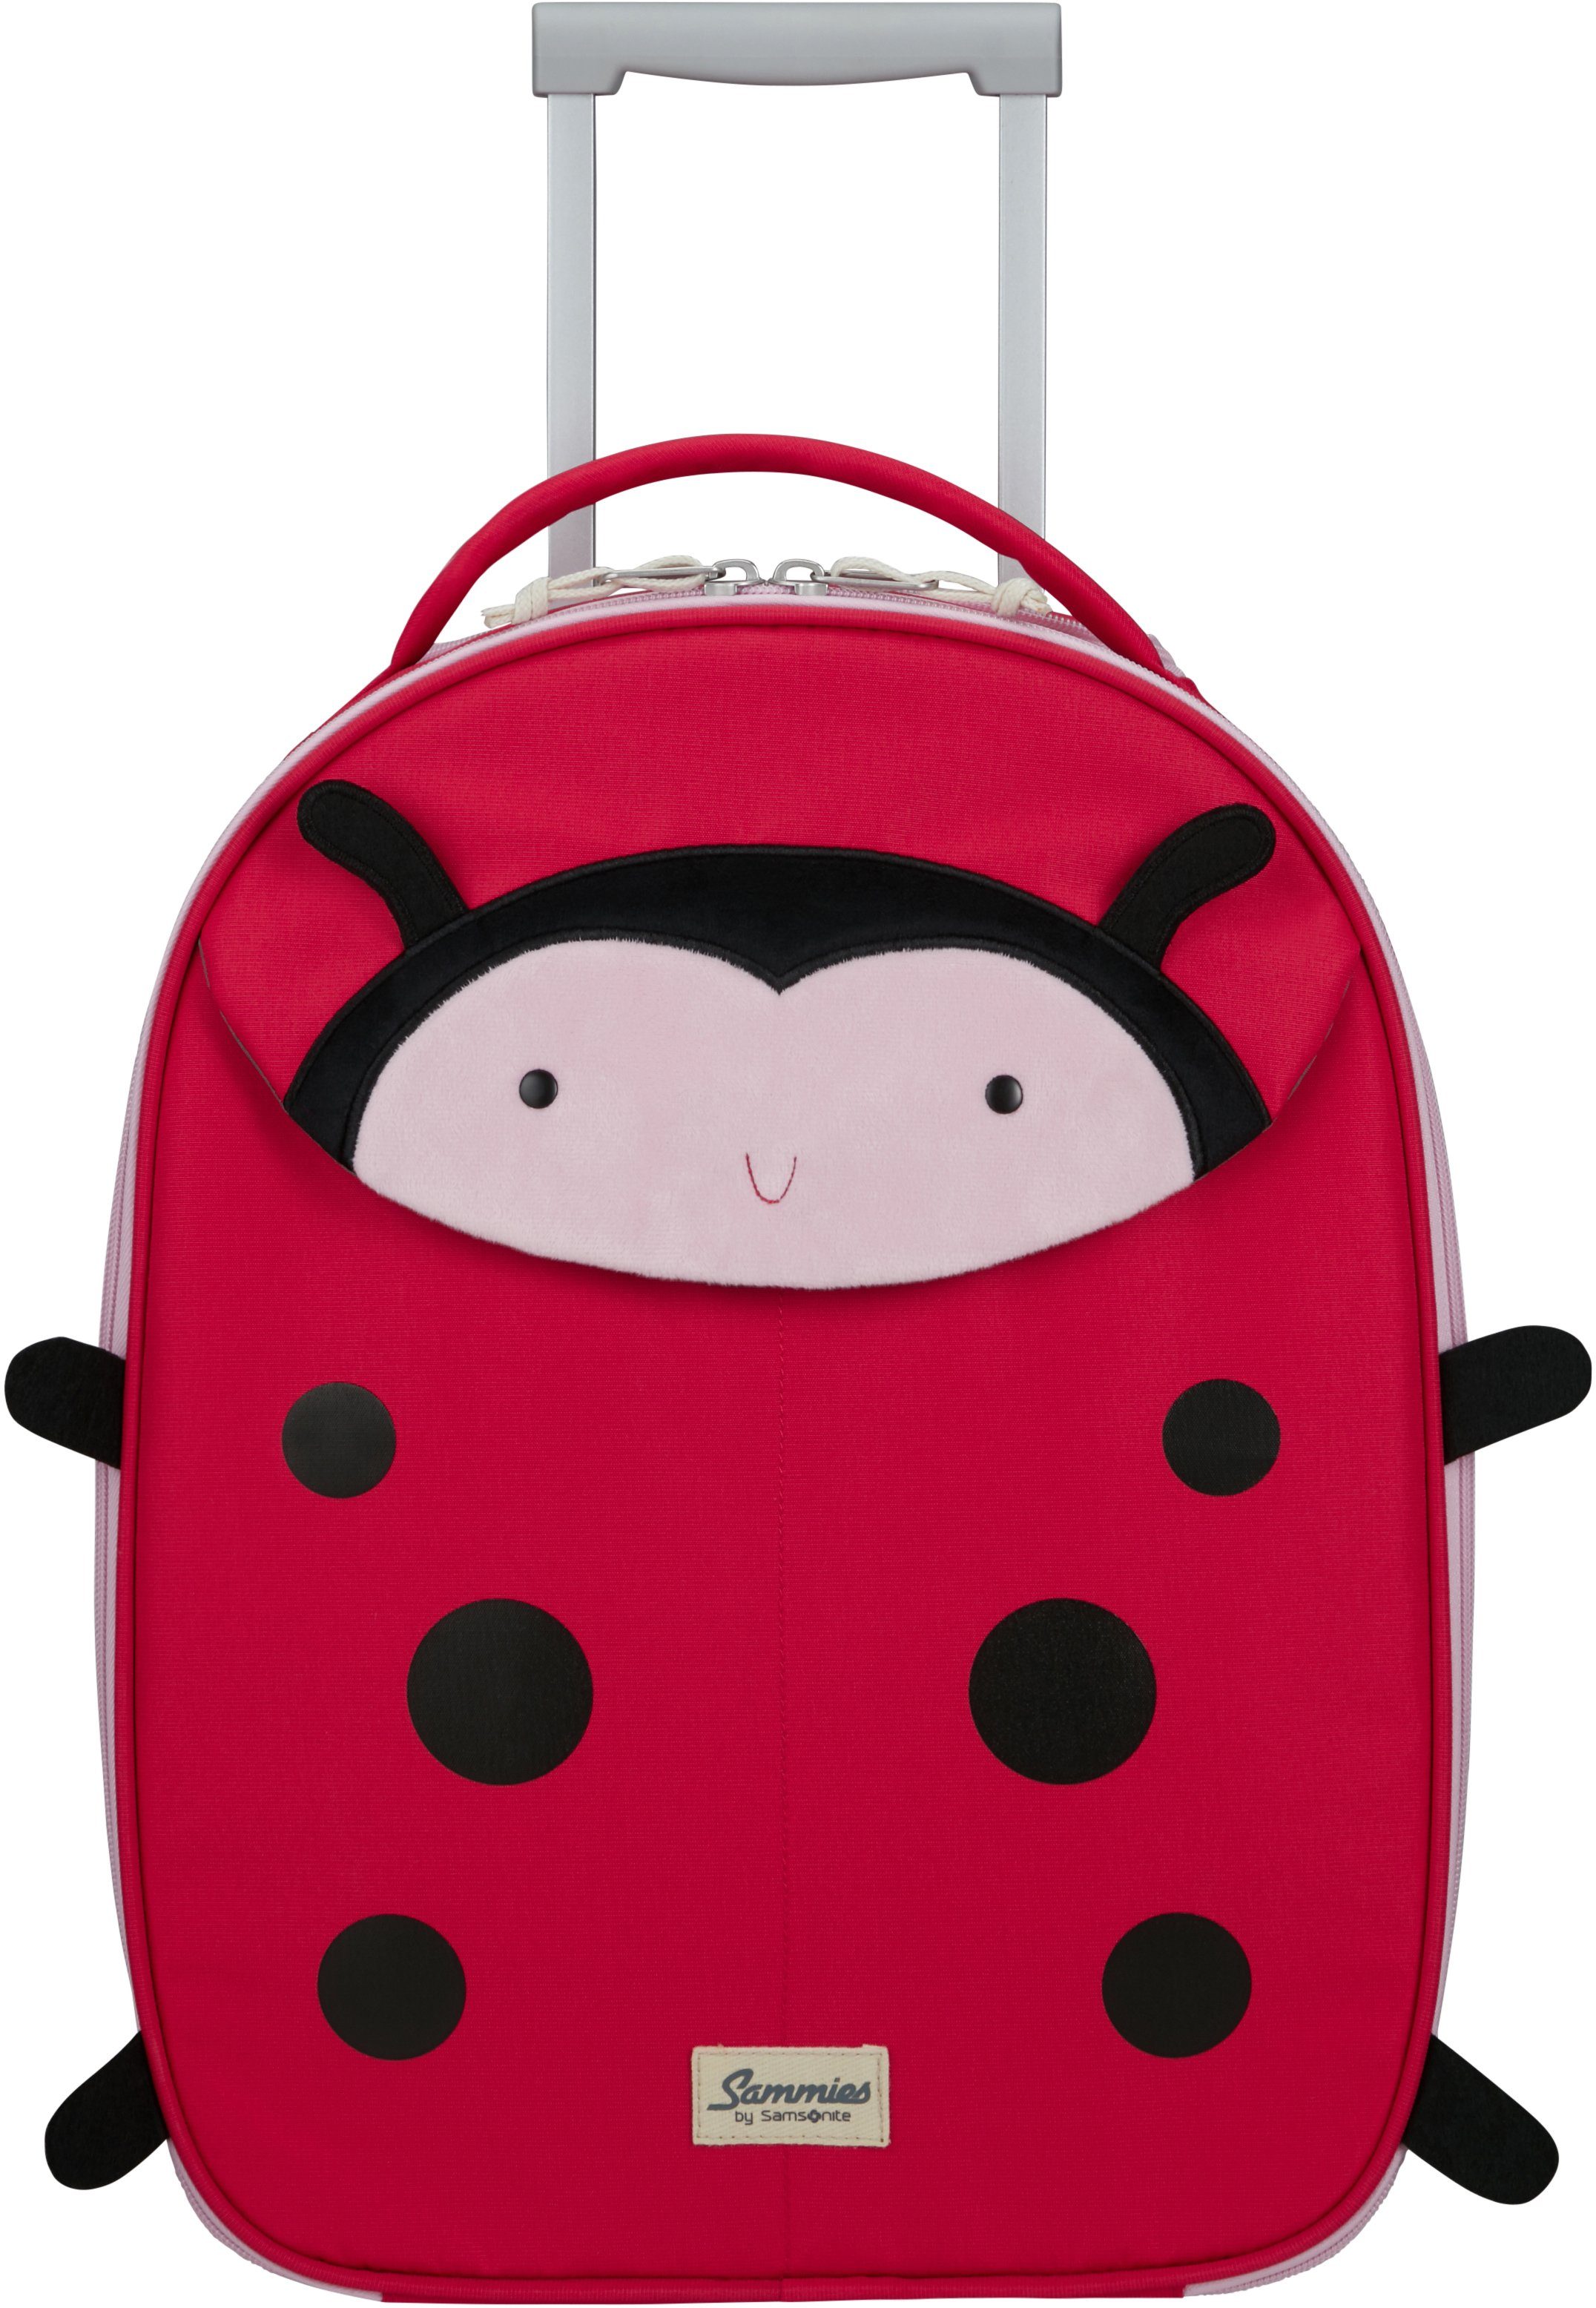 Kinderkoffer Happy ECO, aus Rollen, Lally, recyceltem Sammies Samsonite Material Ladybug 2